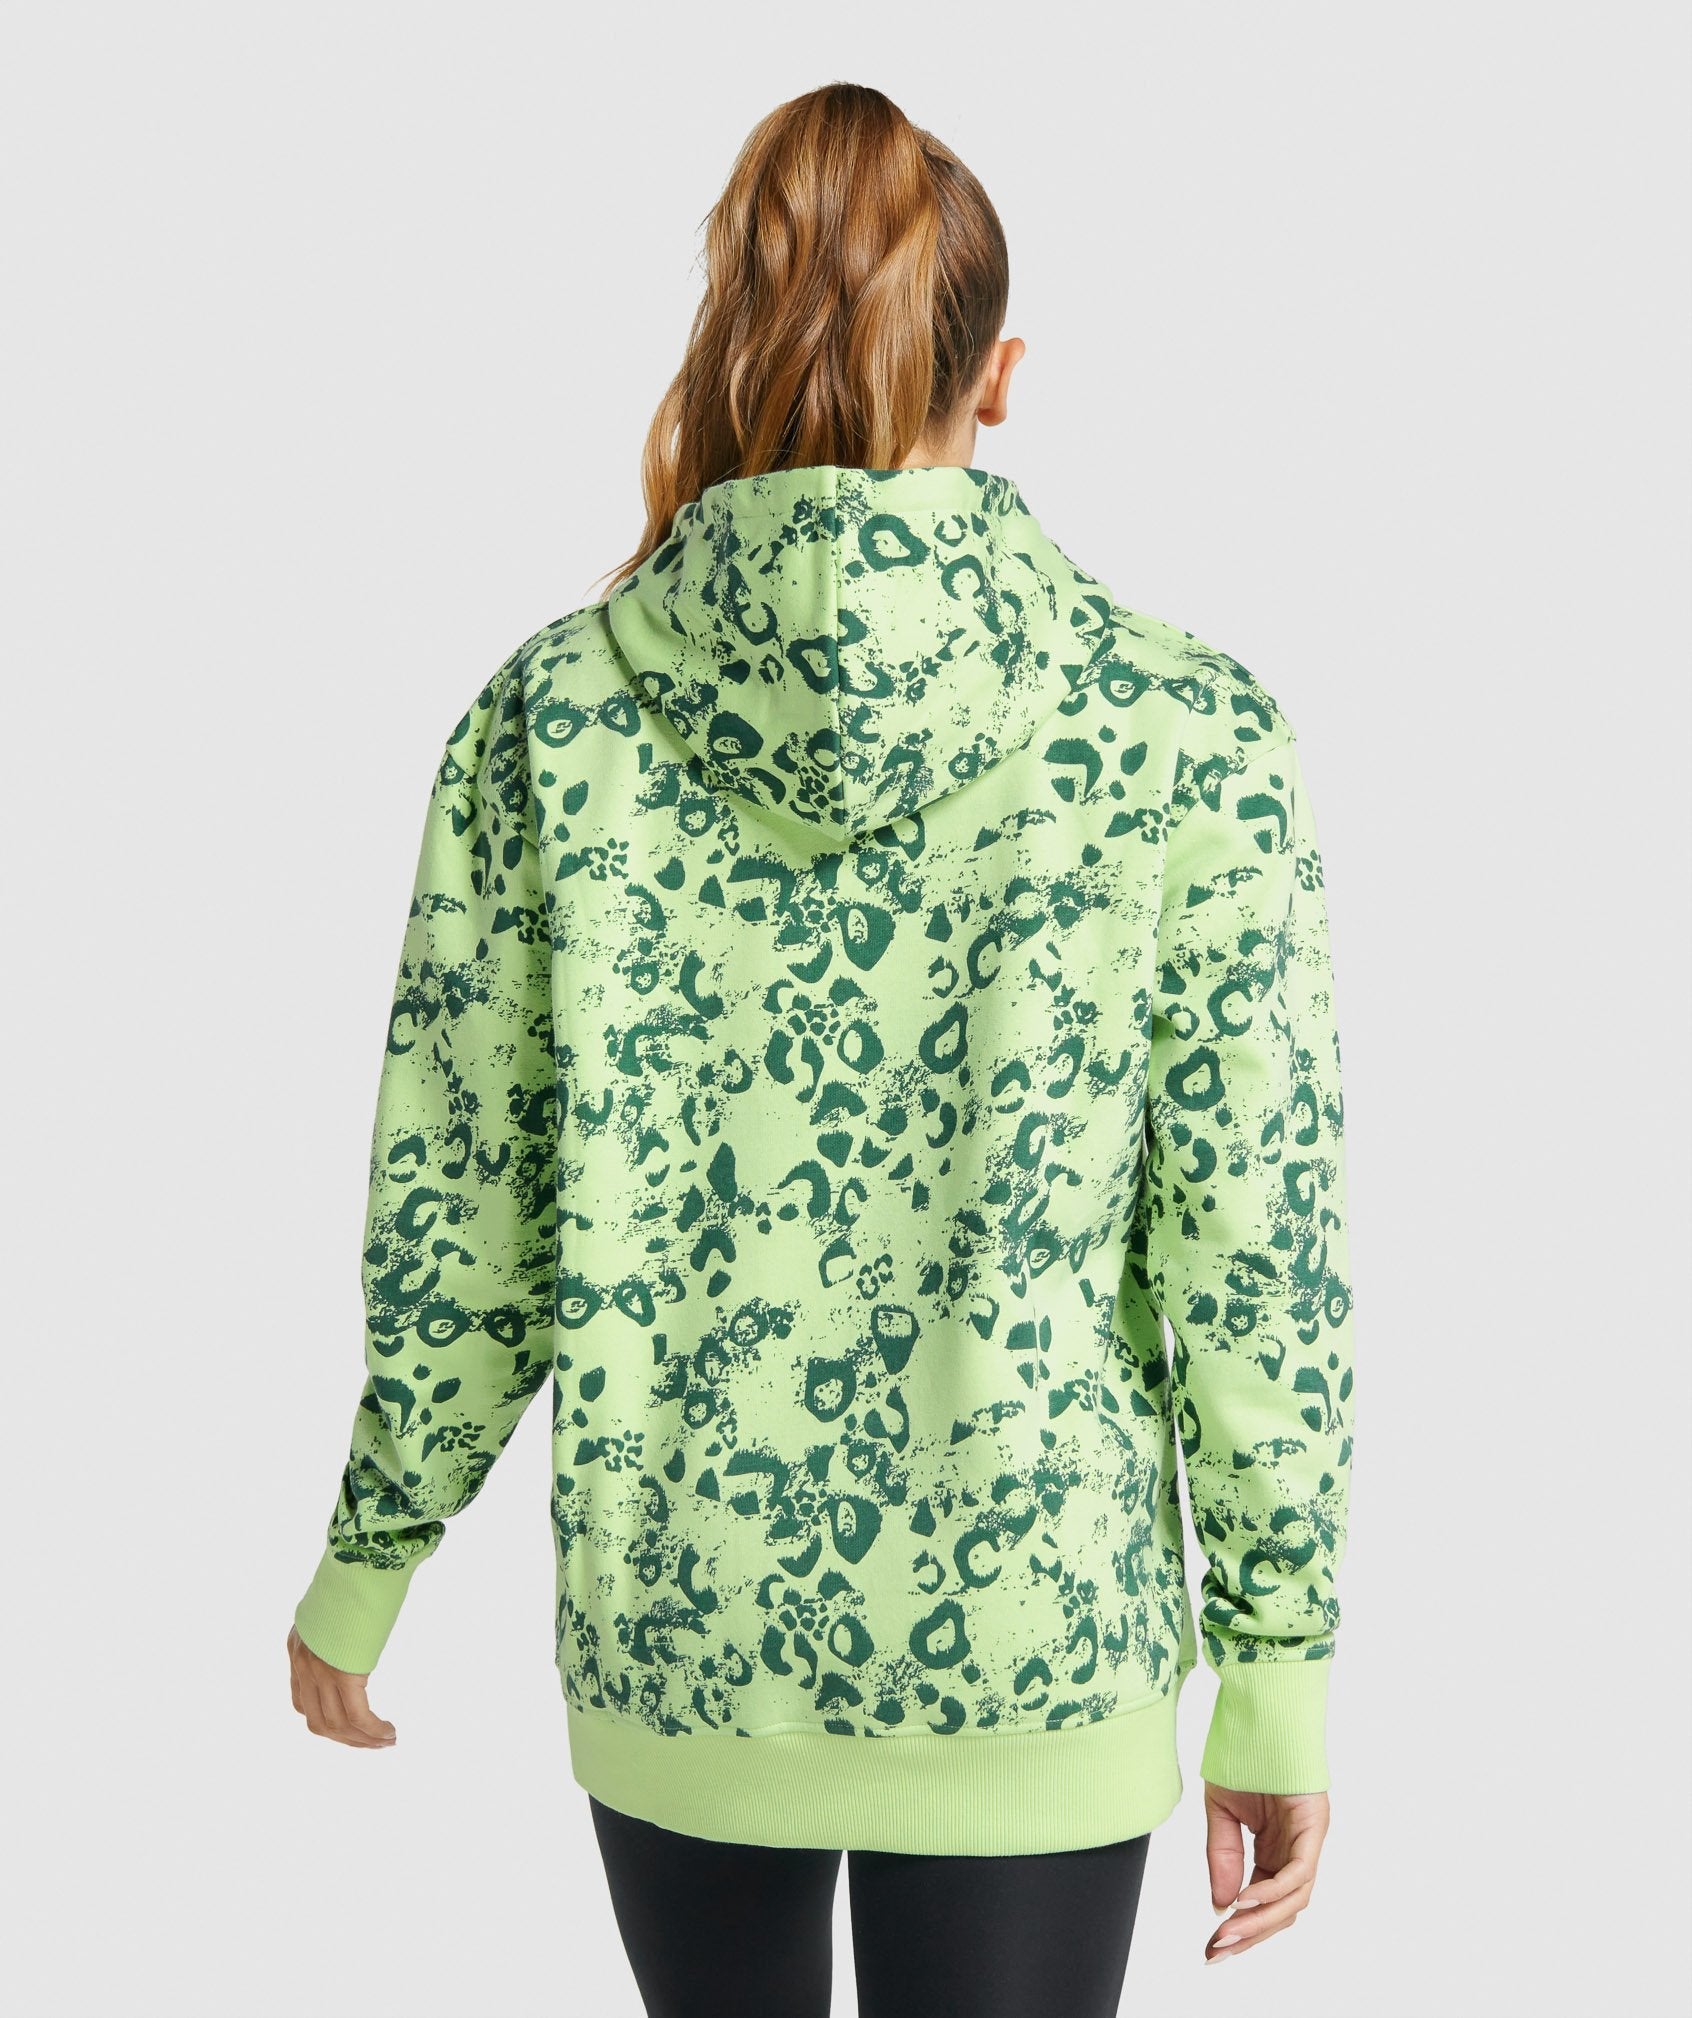 Animal Graphic Hoodie in Lime/Dark Green Print - view 2